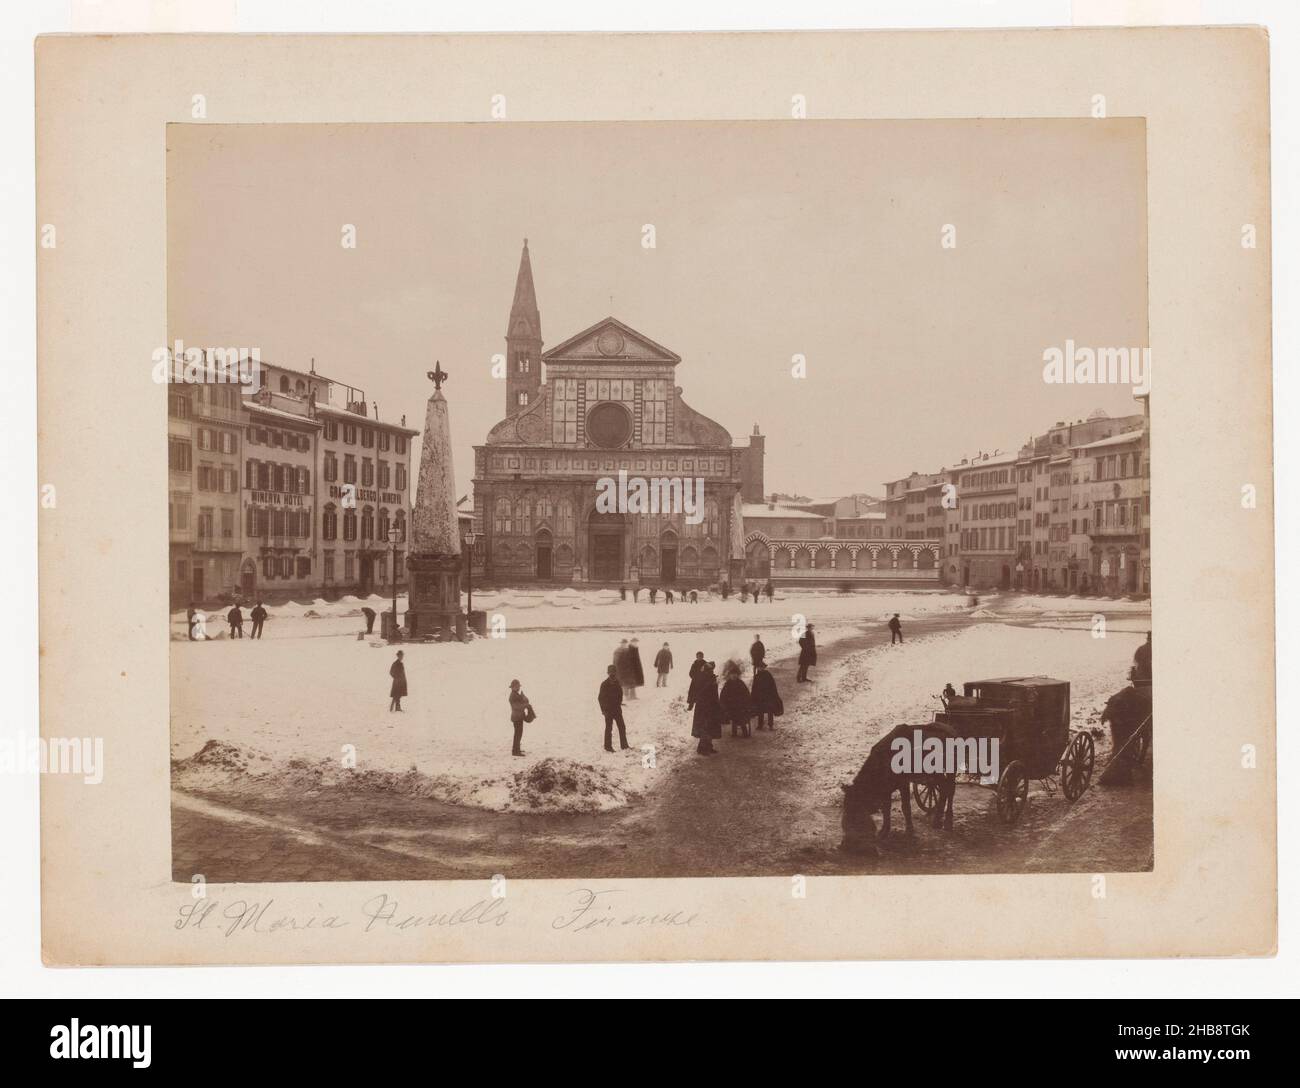 Exterior of the Santa Maria Novella in Florence, Italy, St Maria Novella, Firenze (title on object), anonymous, Bartolomeo Ammannati, Florence, 1851 - 1900, cardboard, paper, albumen print, height 241 mm × width 321 mm Stock Photo